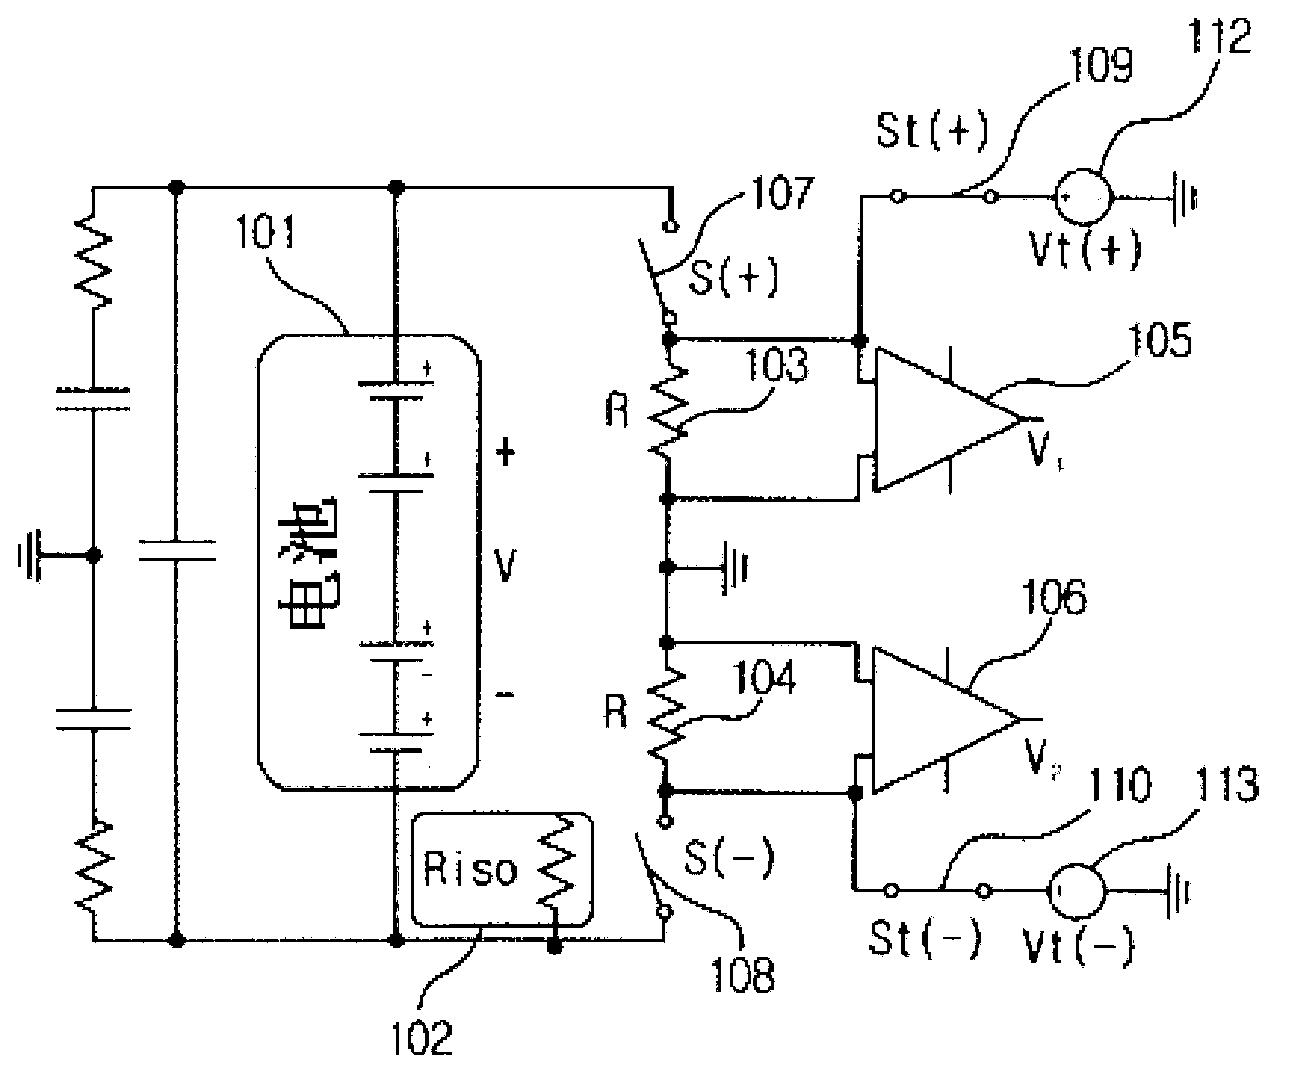 Insulation resistance measurement circuit having self-est function without generating leakage current